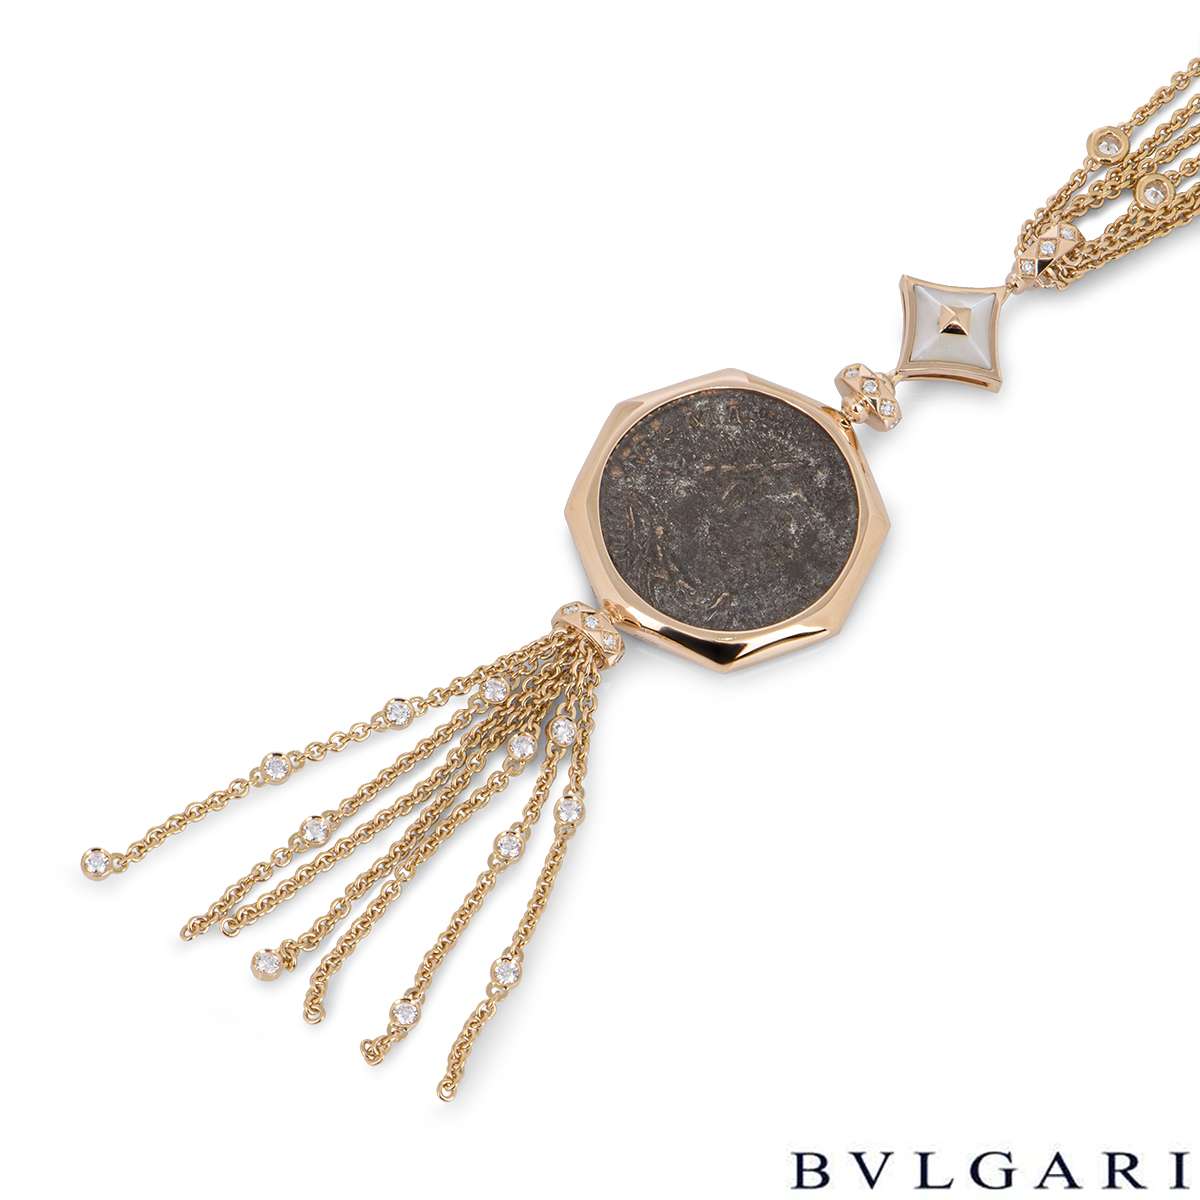 Bvlgari Rose Gold Diamond & Mother of Pearl Monete Necklace 355982